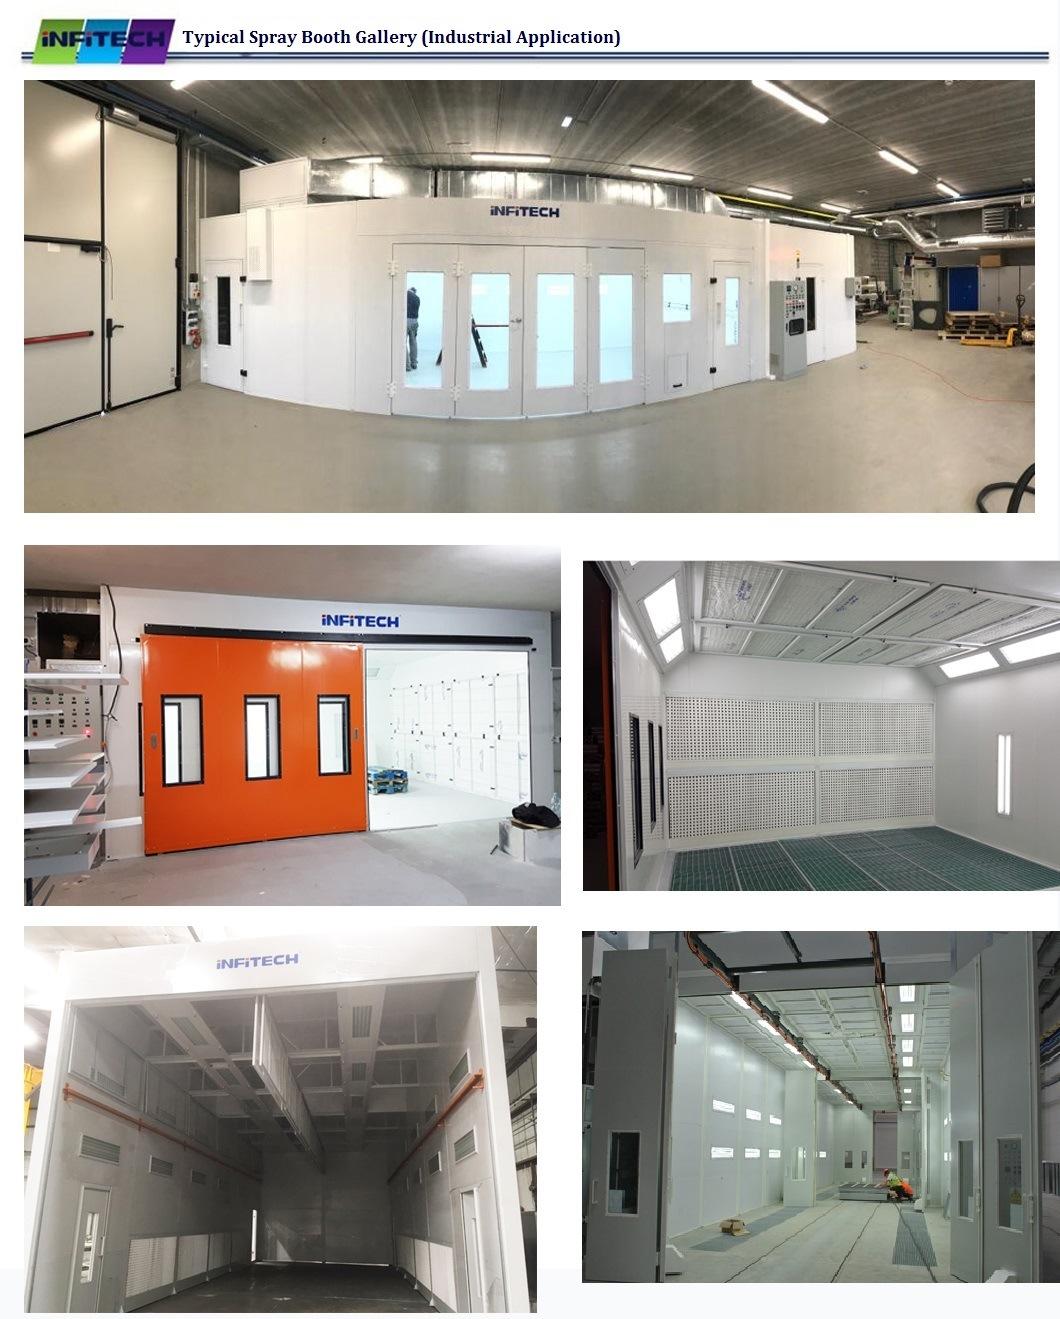 New Zealand Standard Customized Industrial Bus Paint Booth with 2 Work Zones